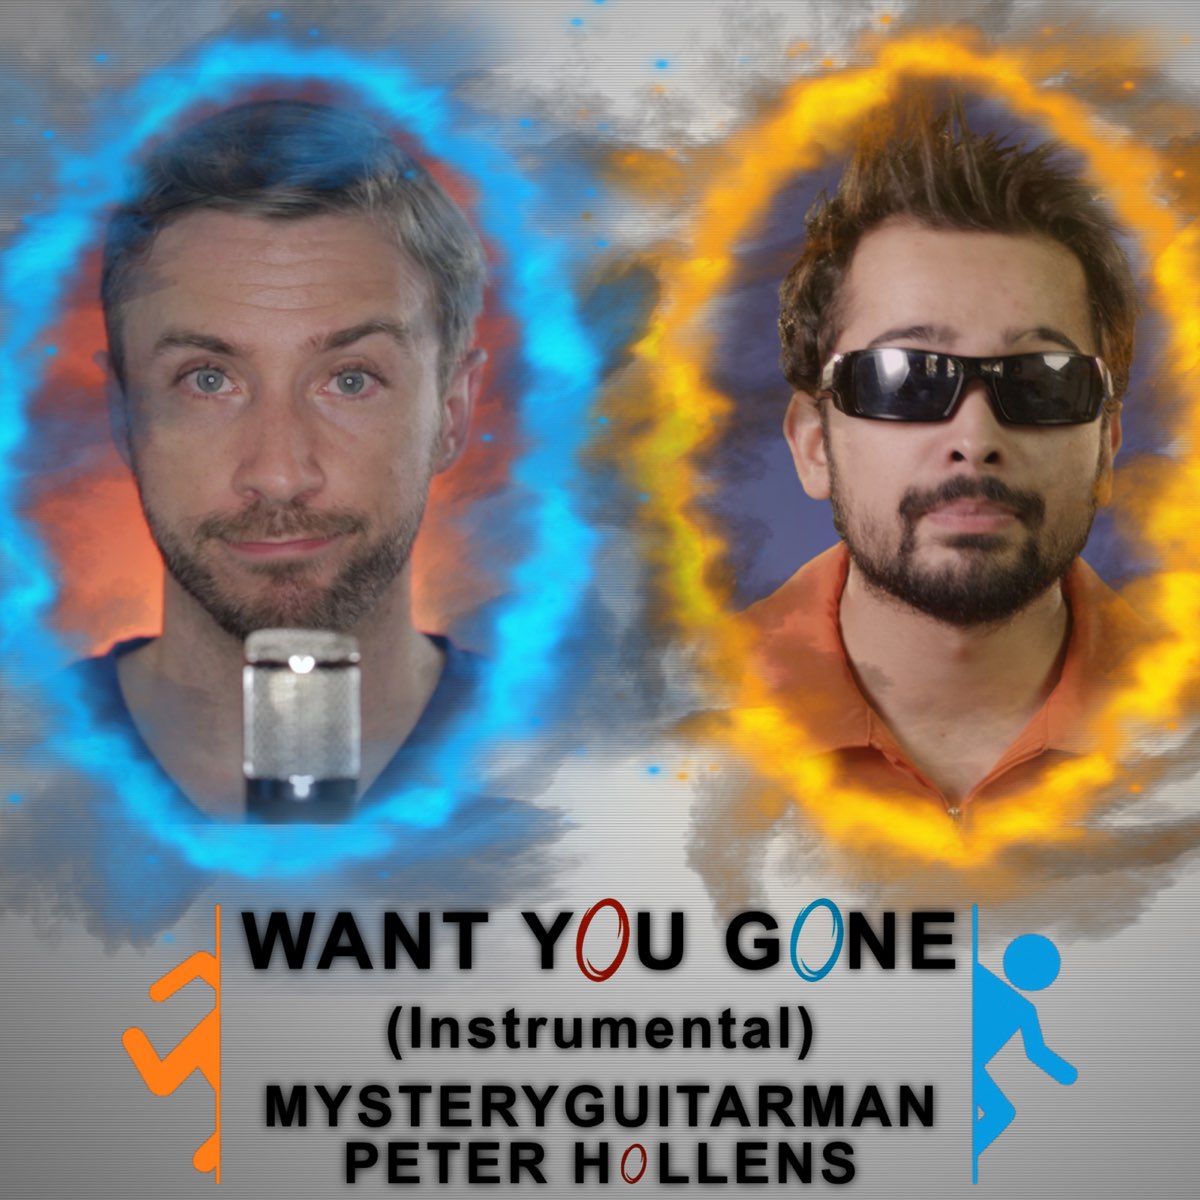 Want You Gone From Portal 2 Instrumental Single By Peter Hollens Mysteryguitarman On Apple Music